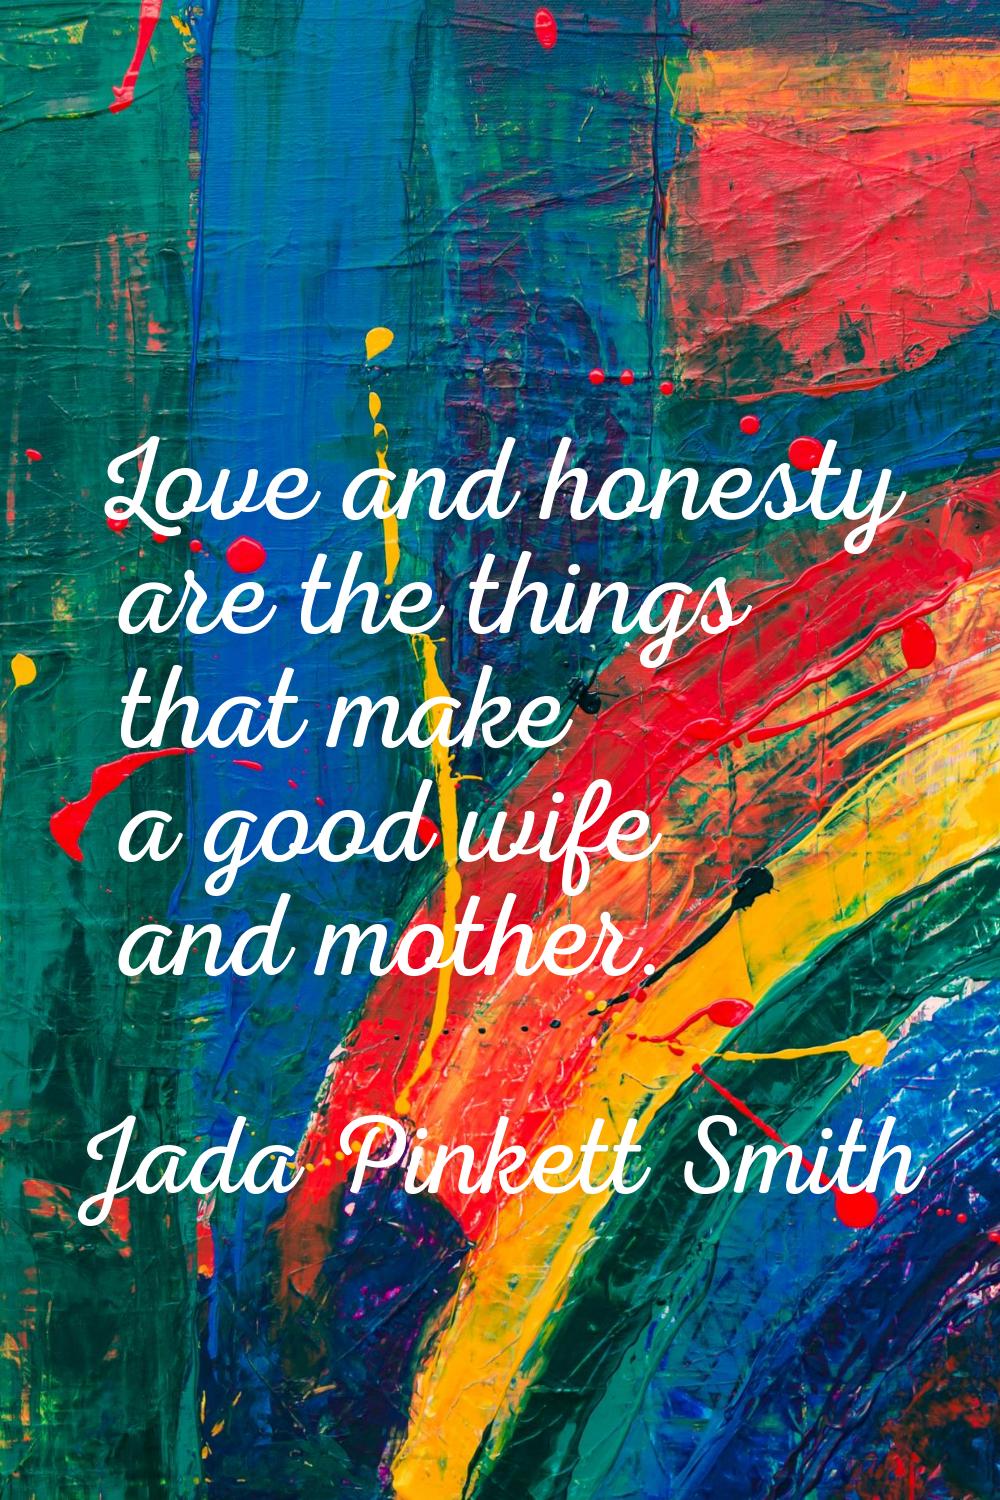 Love and honesty are the things that make a good wife and mother.